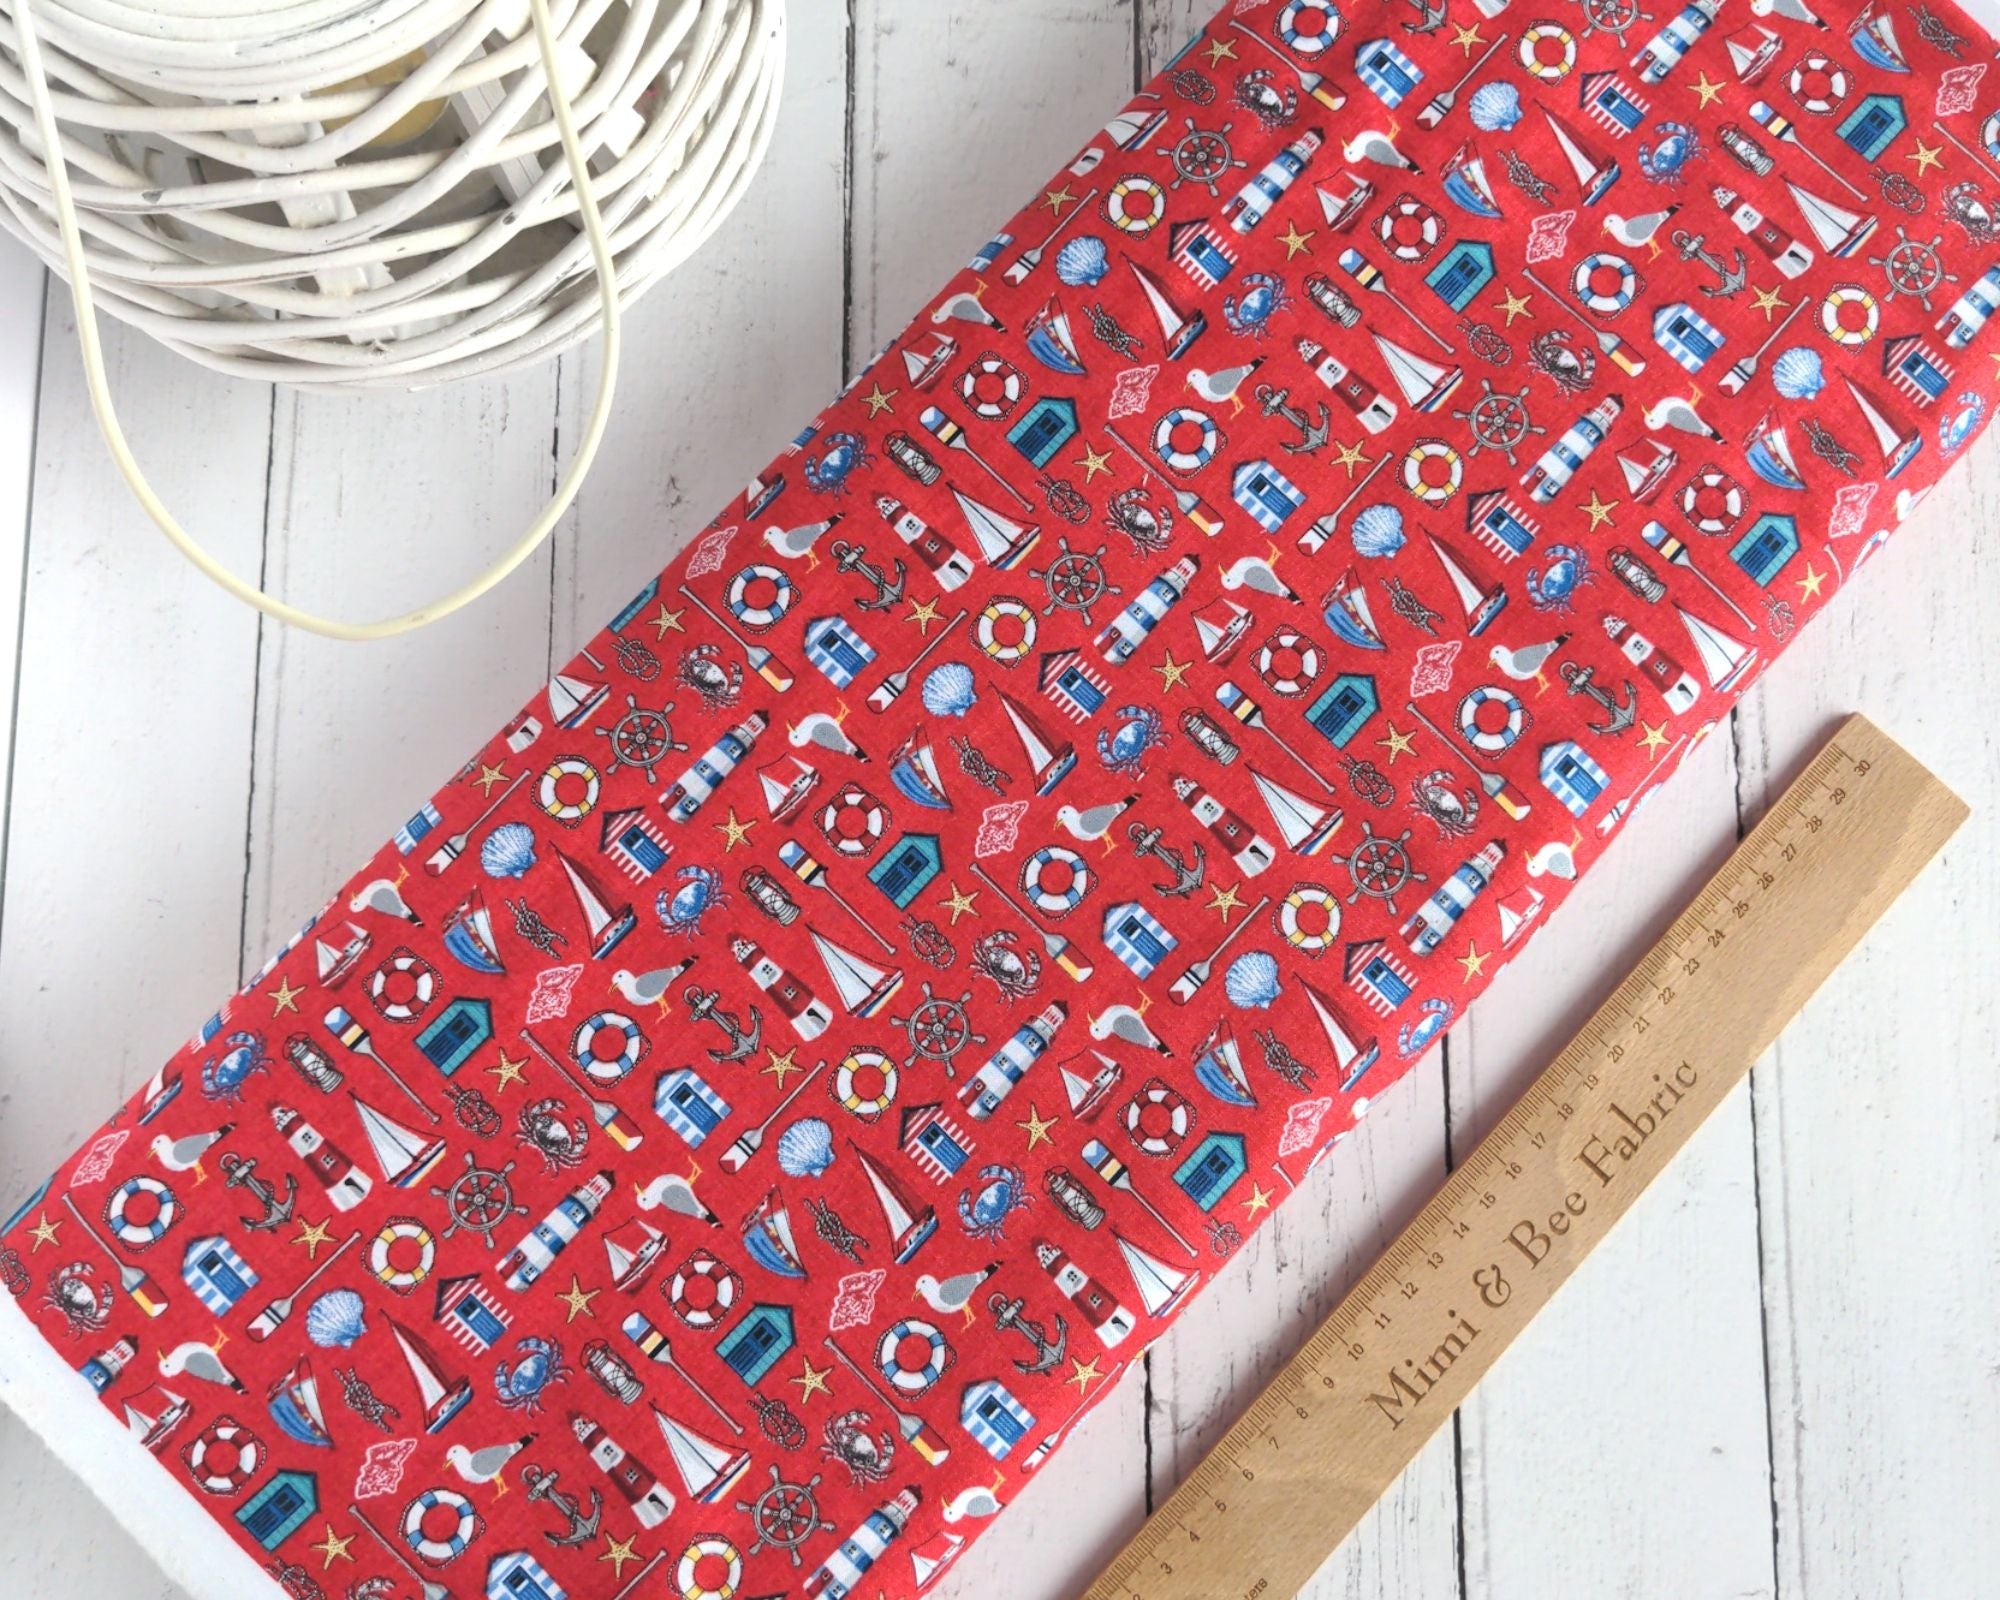 Seaside beach huts and lighthouses on red cotton fabric- Nautical by Makower